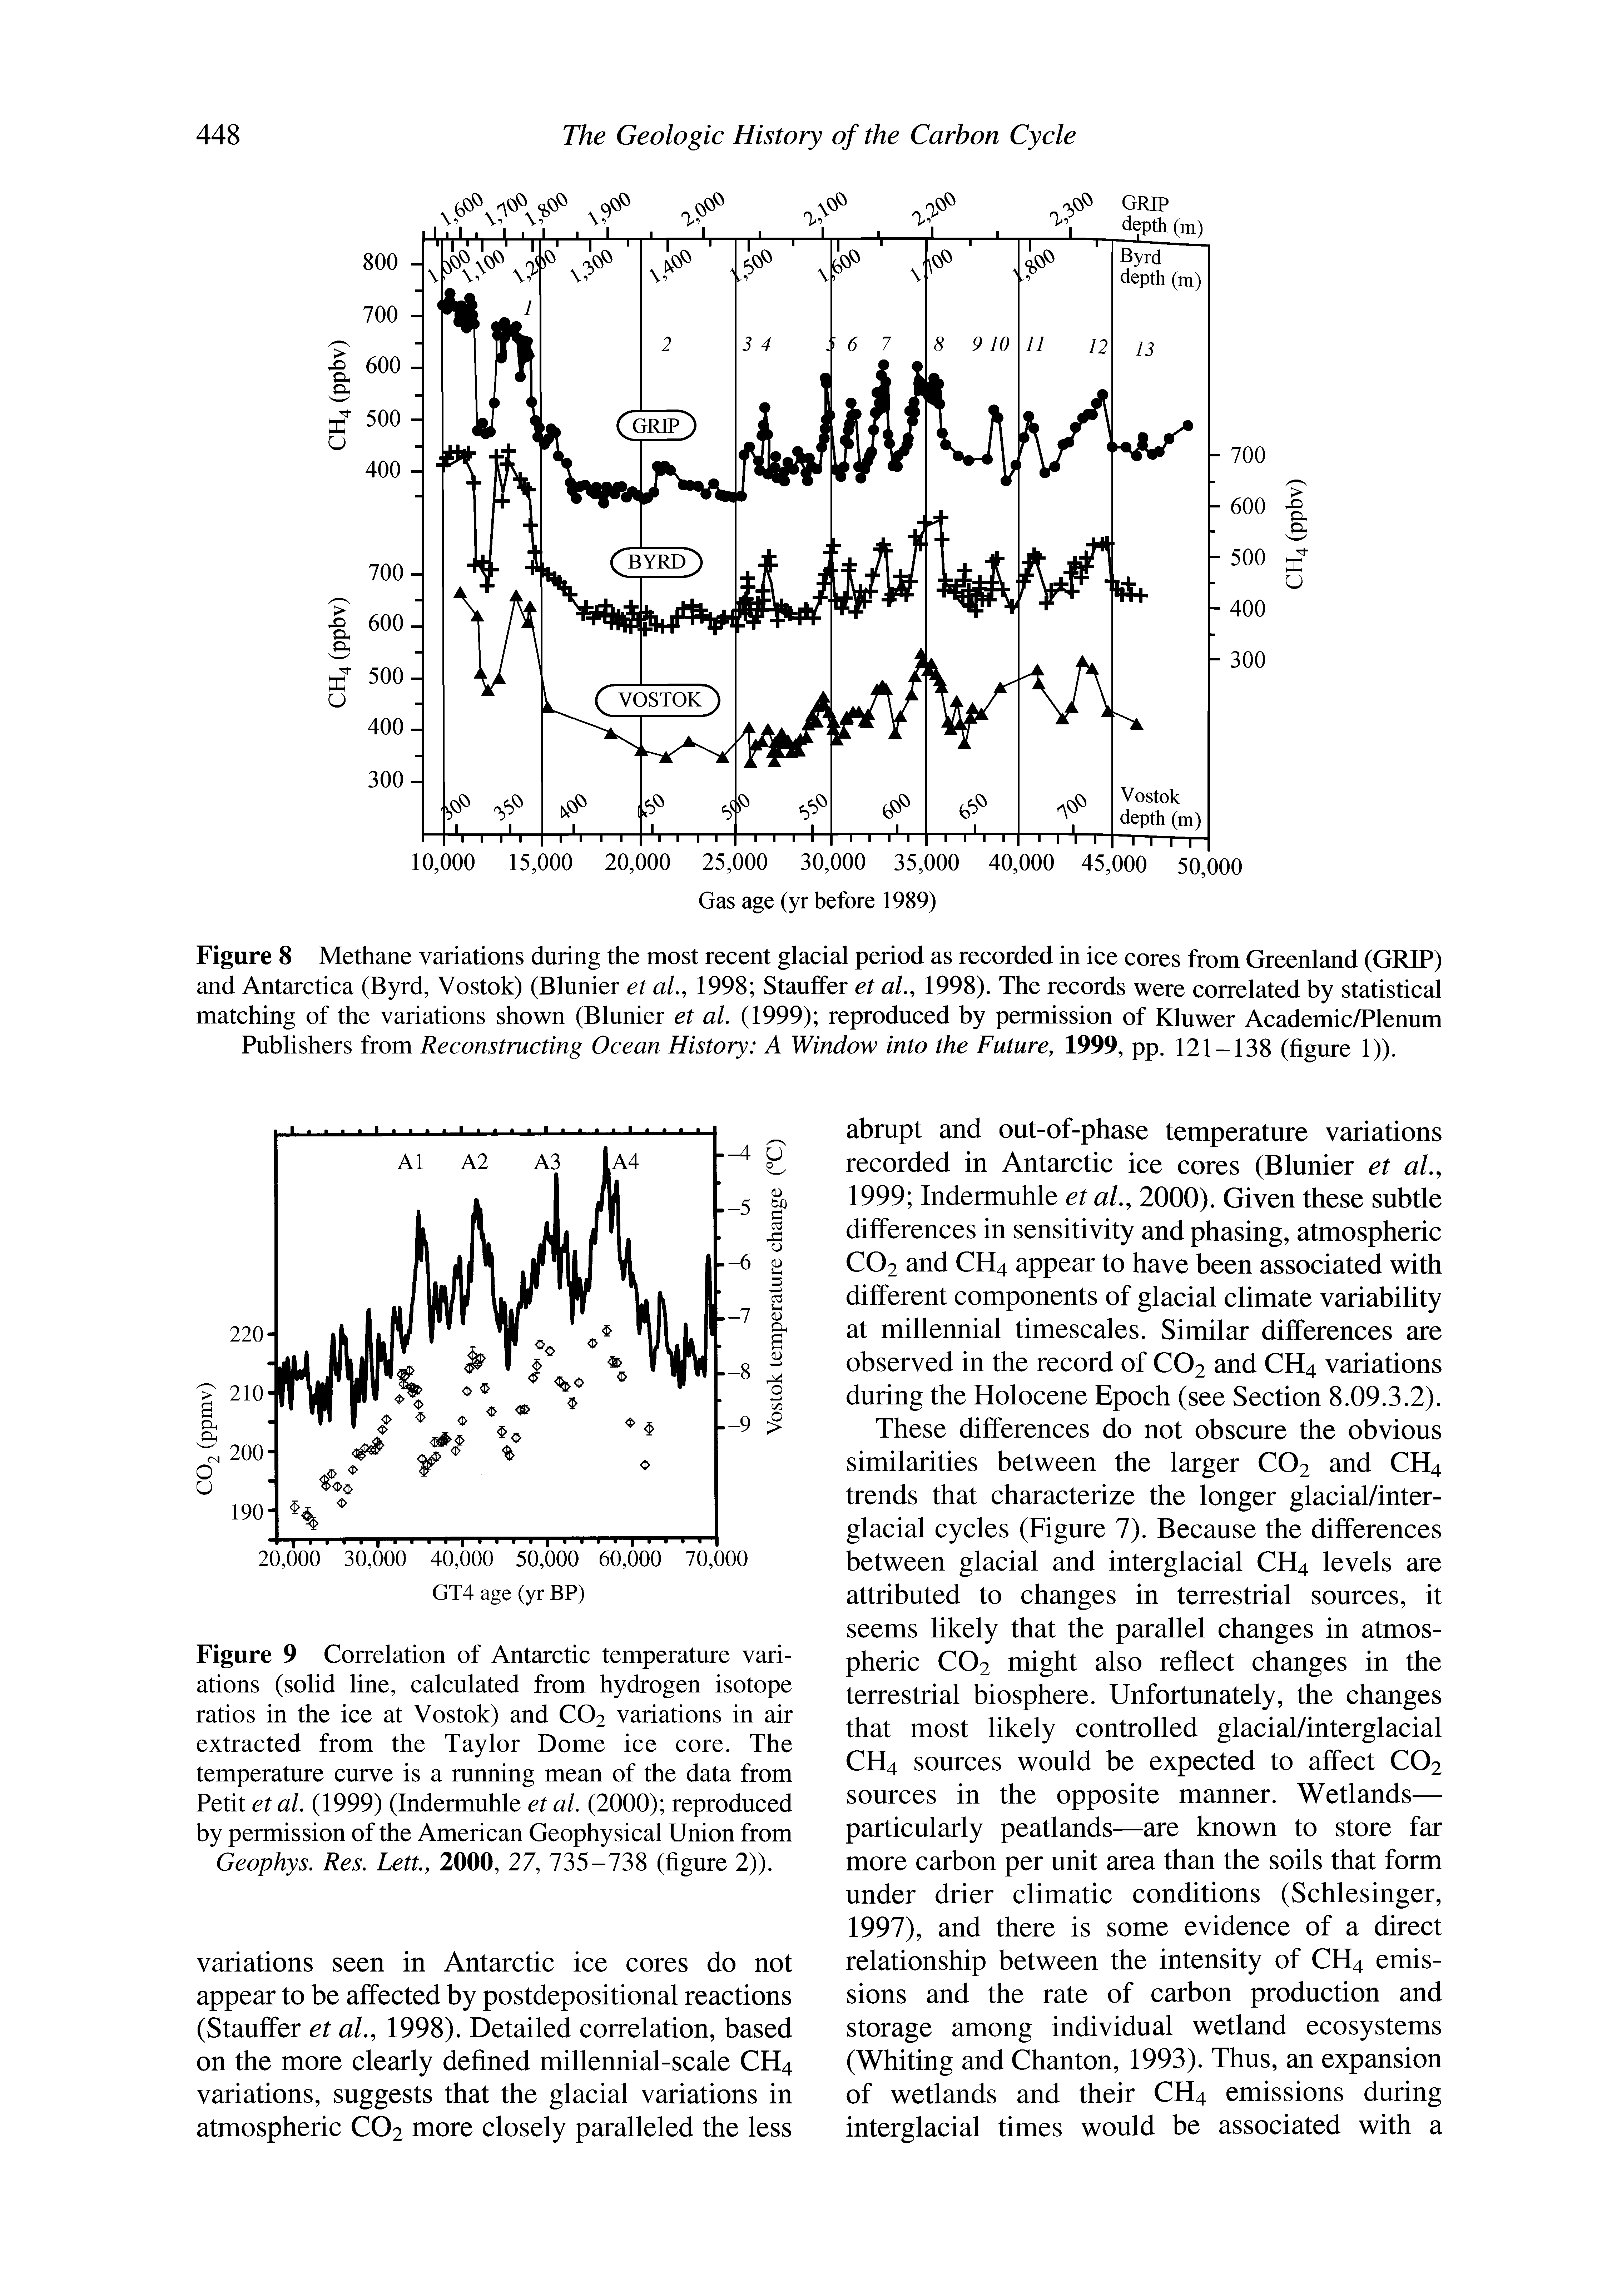 Figure 9 Correlation of Antarctic temperature variations (solid line, calculated from hydrogen isotope ratios in the ice at Vostok) and CO2 variations in air extracted from the Taylor Dome ice core. The temperature curve is a running mean of the data from Petit et al. (1999) (Indermuhle et al. (2000) reproduced by permission of the American Geophysical Union from Geophys. Res. Lett., 2000, 27, 735-738 (figure 2)).